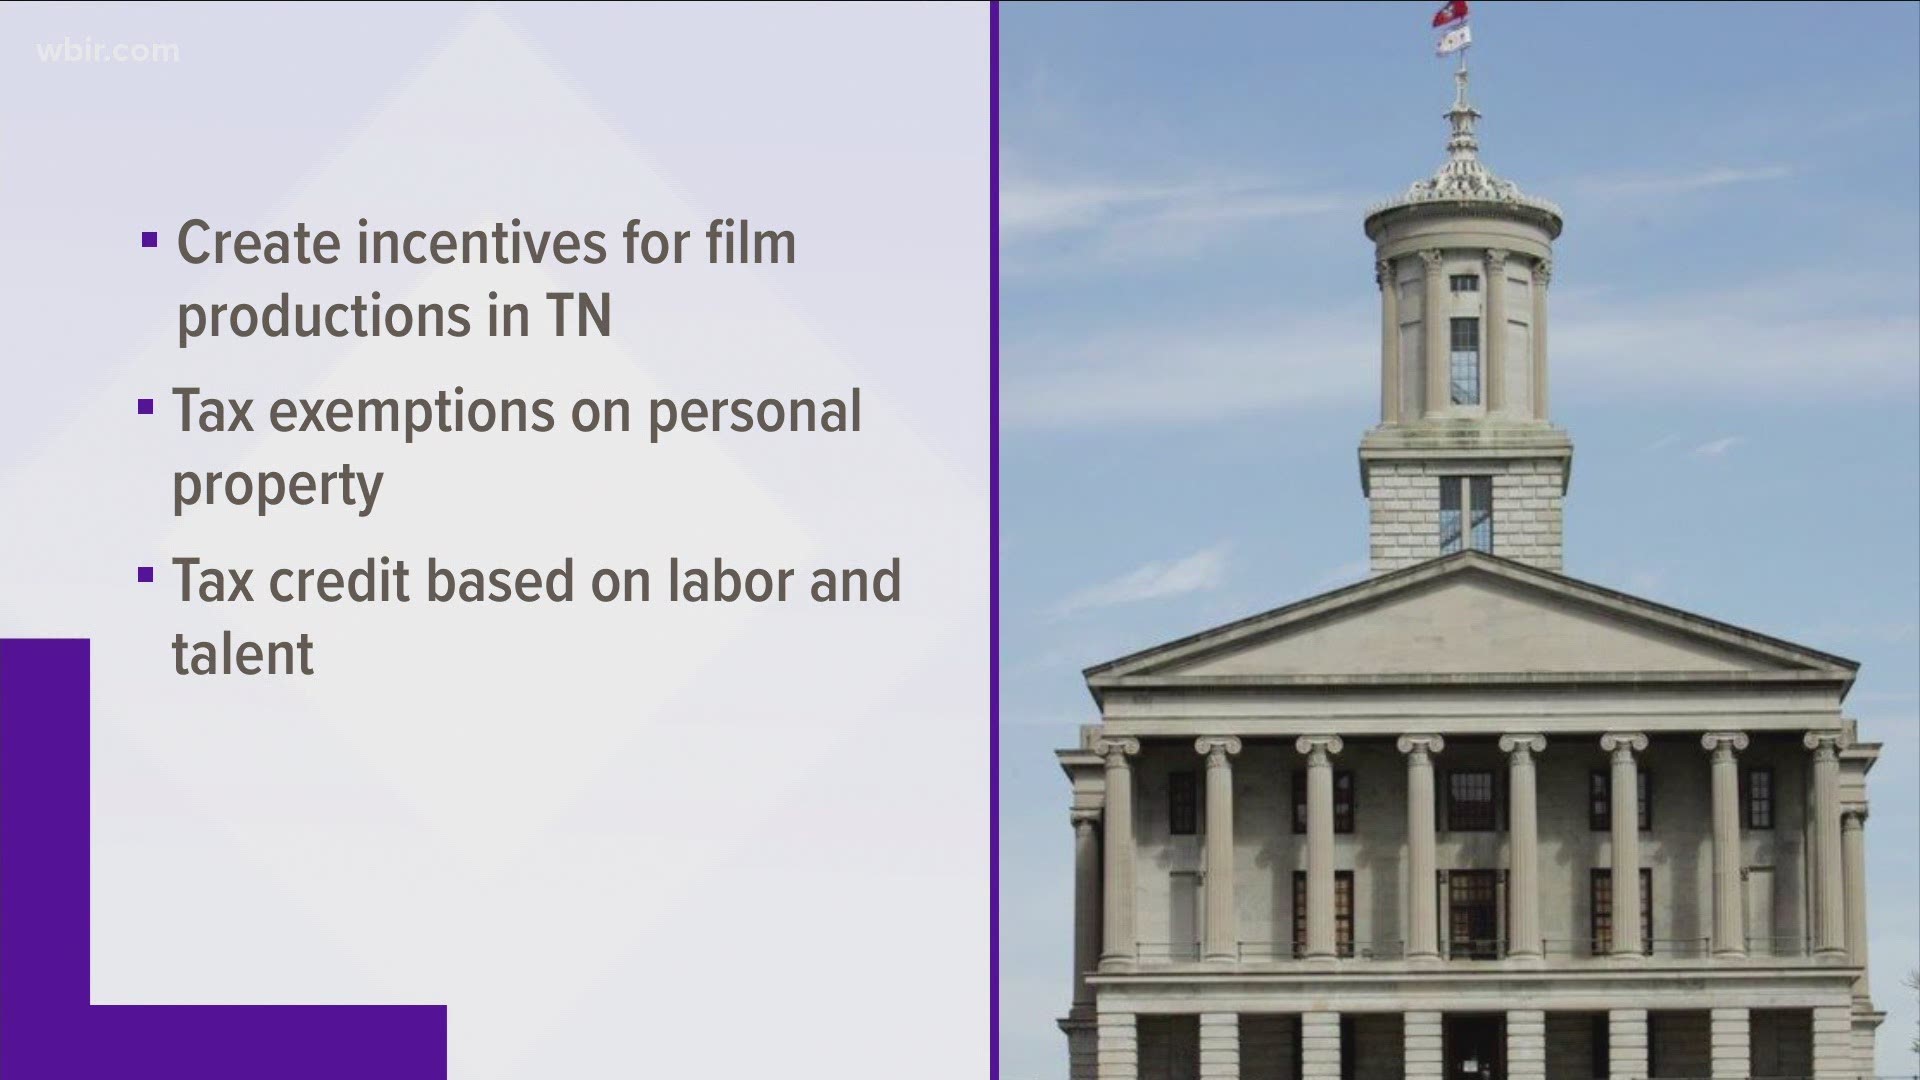 A bill offering tax breaks to film and animation companies in Tennessee is now headed to Governor Bill Lee's desk.